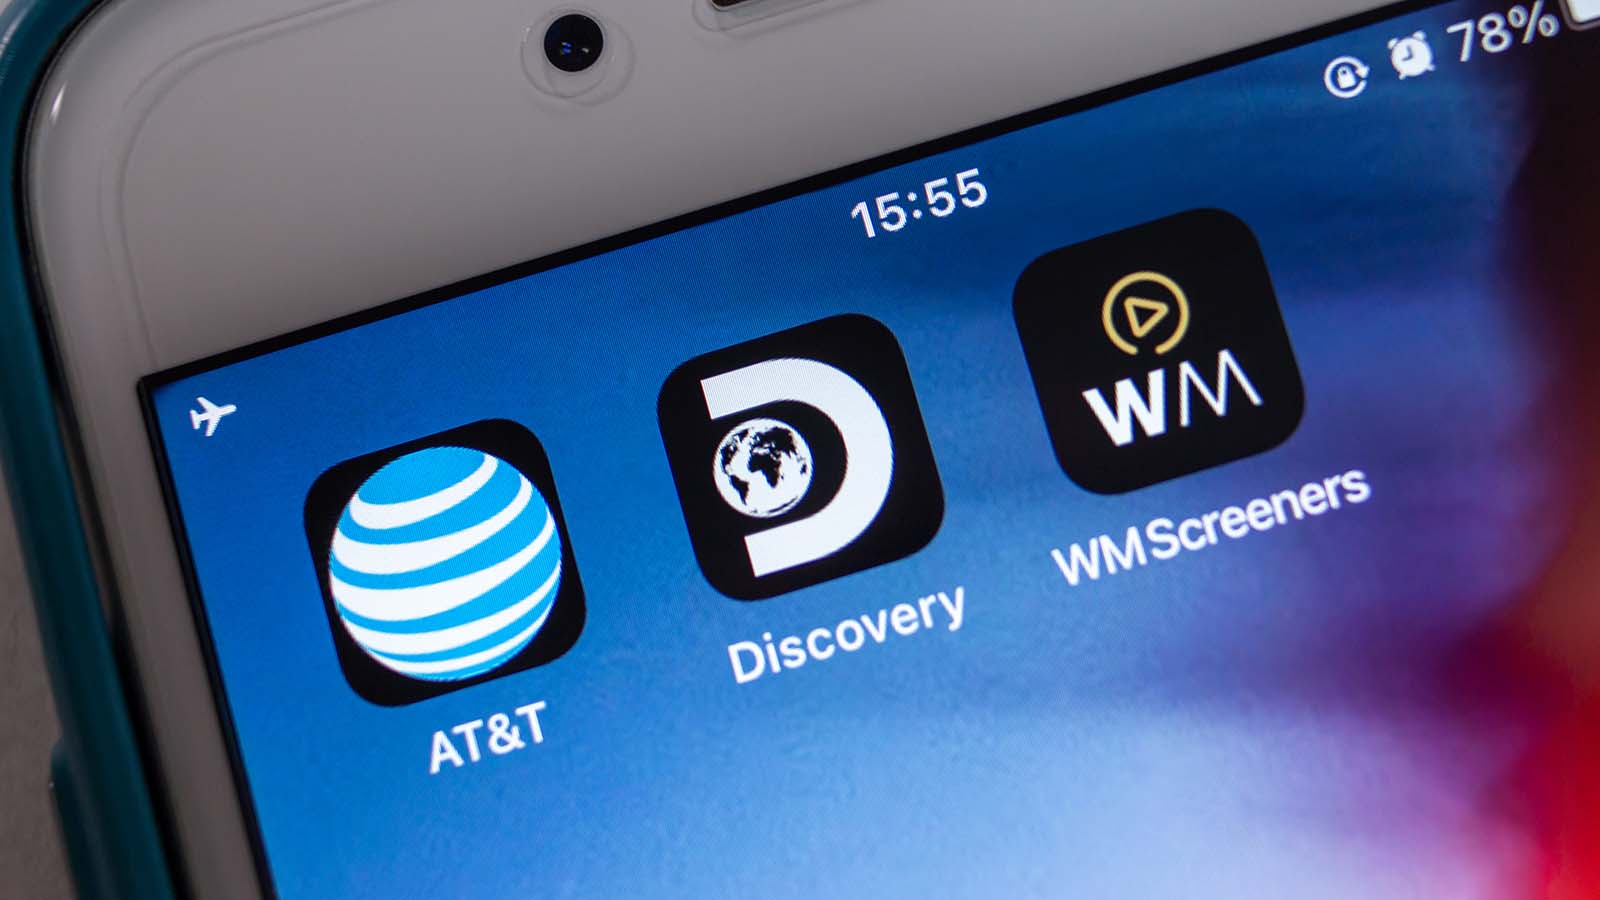 The apps for AT&T (T Stock), Discovery and WarnerMedia displayed on a smartphone screen.